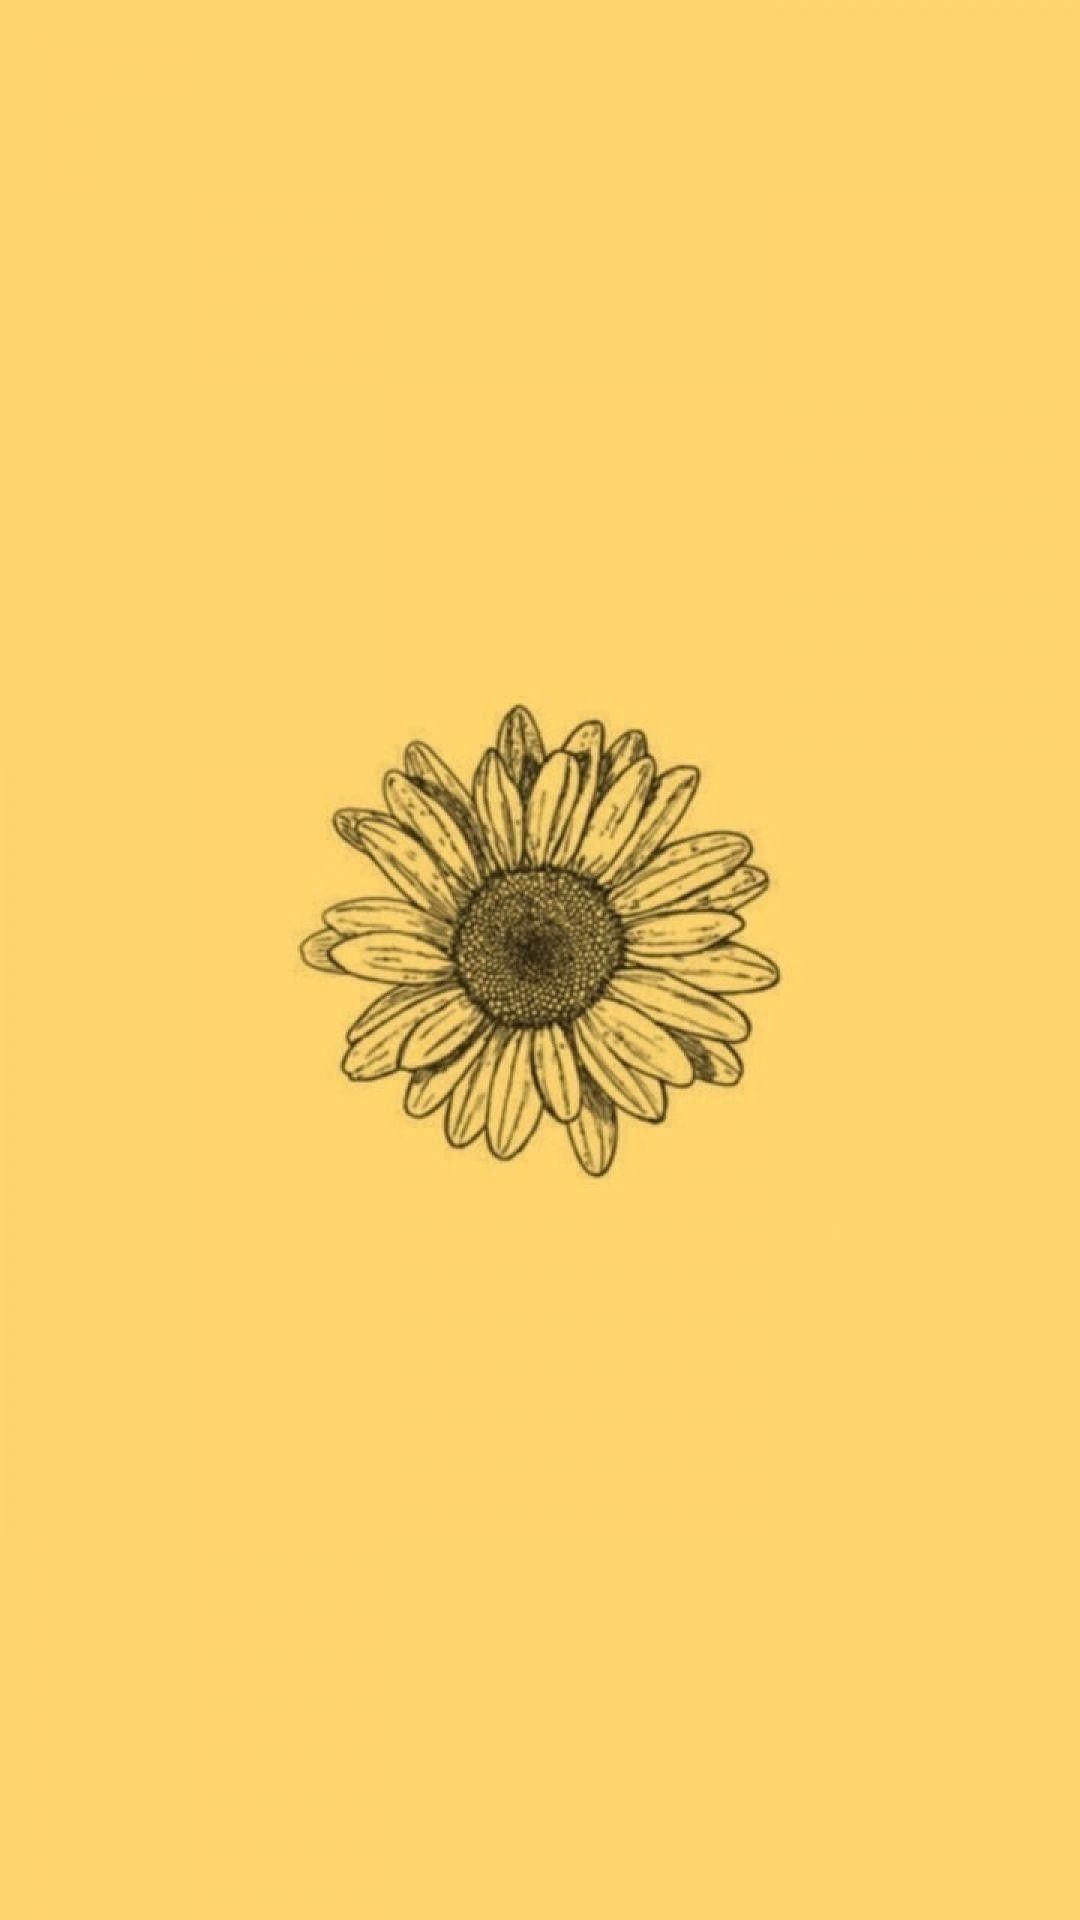 A yellow background with an image of the sunflower - Yellow iphone